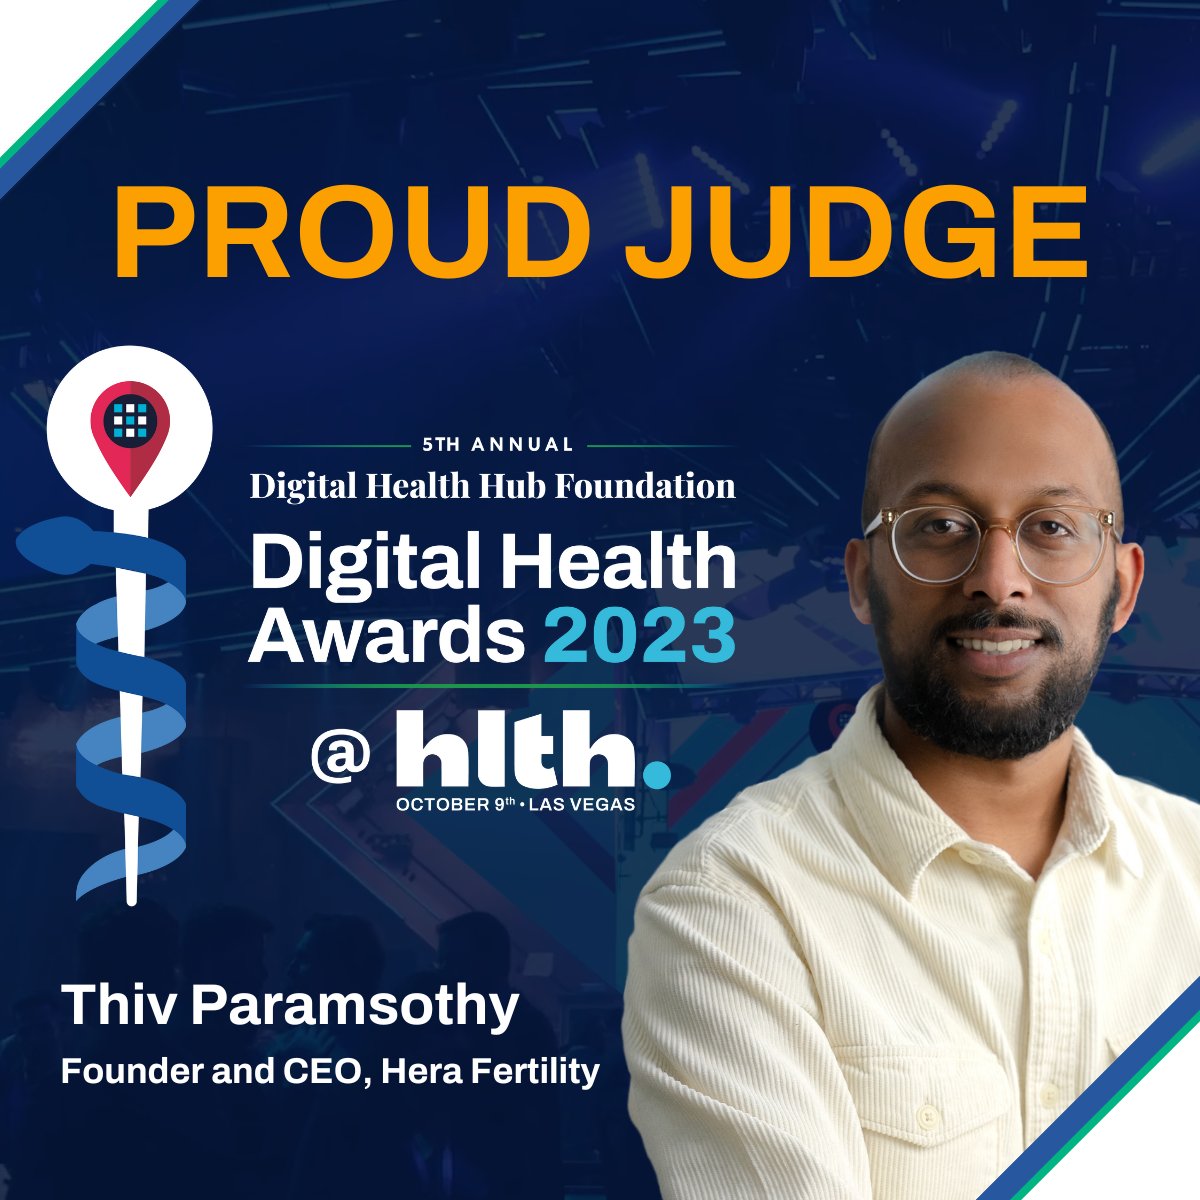 Excited to be a judge for the Digital Health Hub Foundation and Digital Health Awards again - the biggest healthcare award show in the world held at @HLTHEVENT!  

Don't miss the award ceremony Oct 9th! #hlth23 #digitalhealth #health